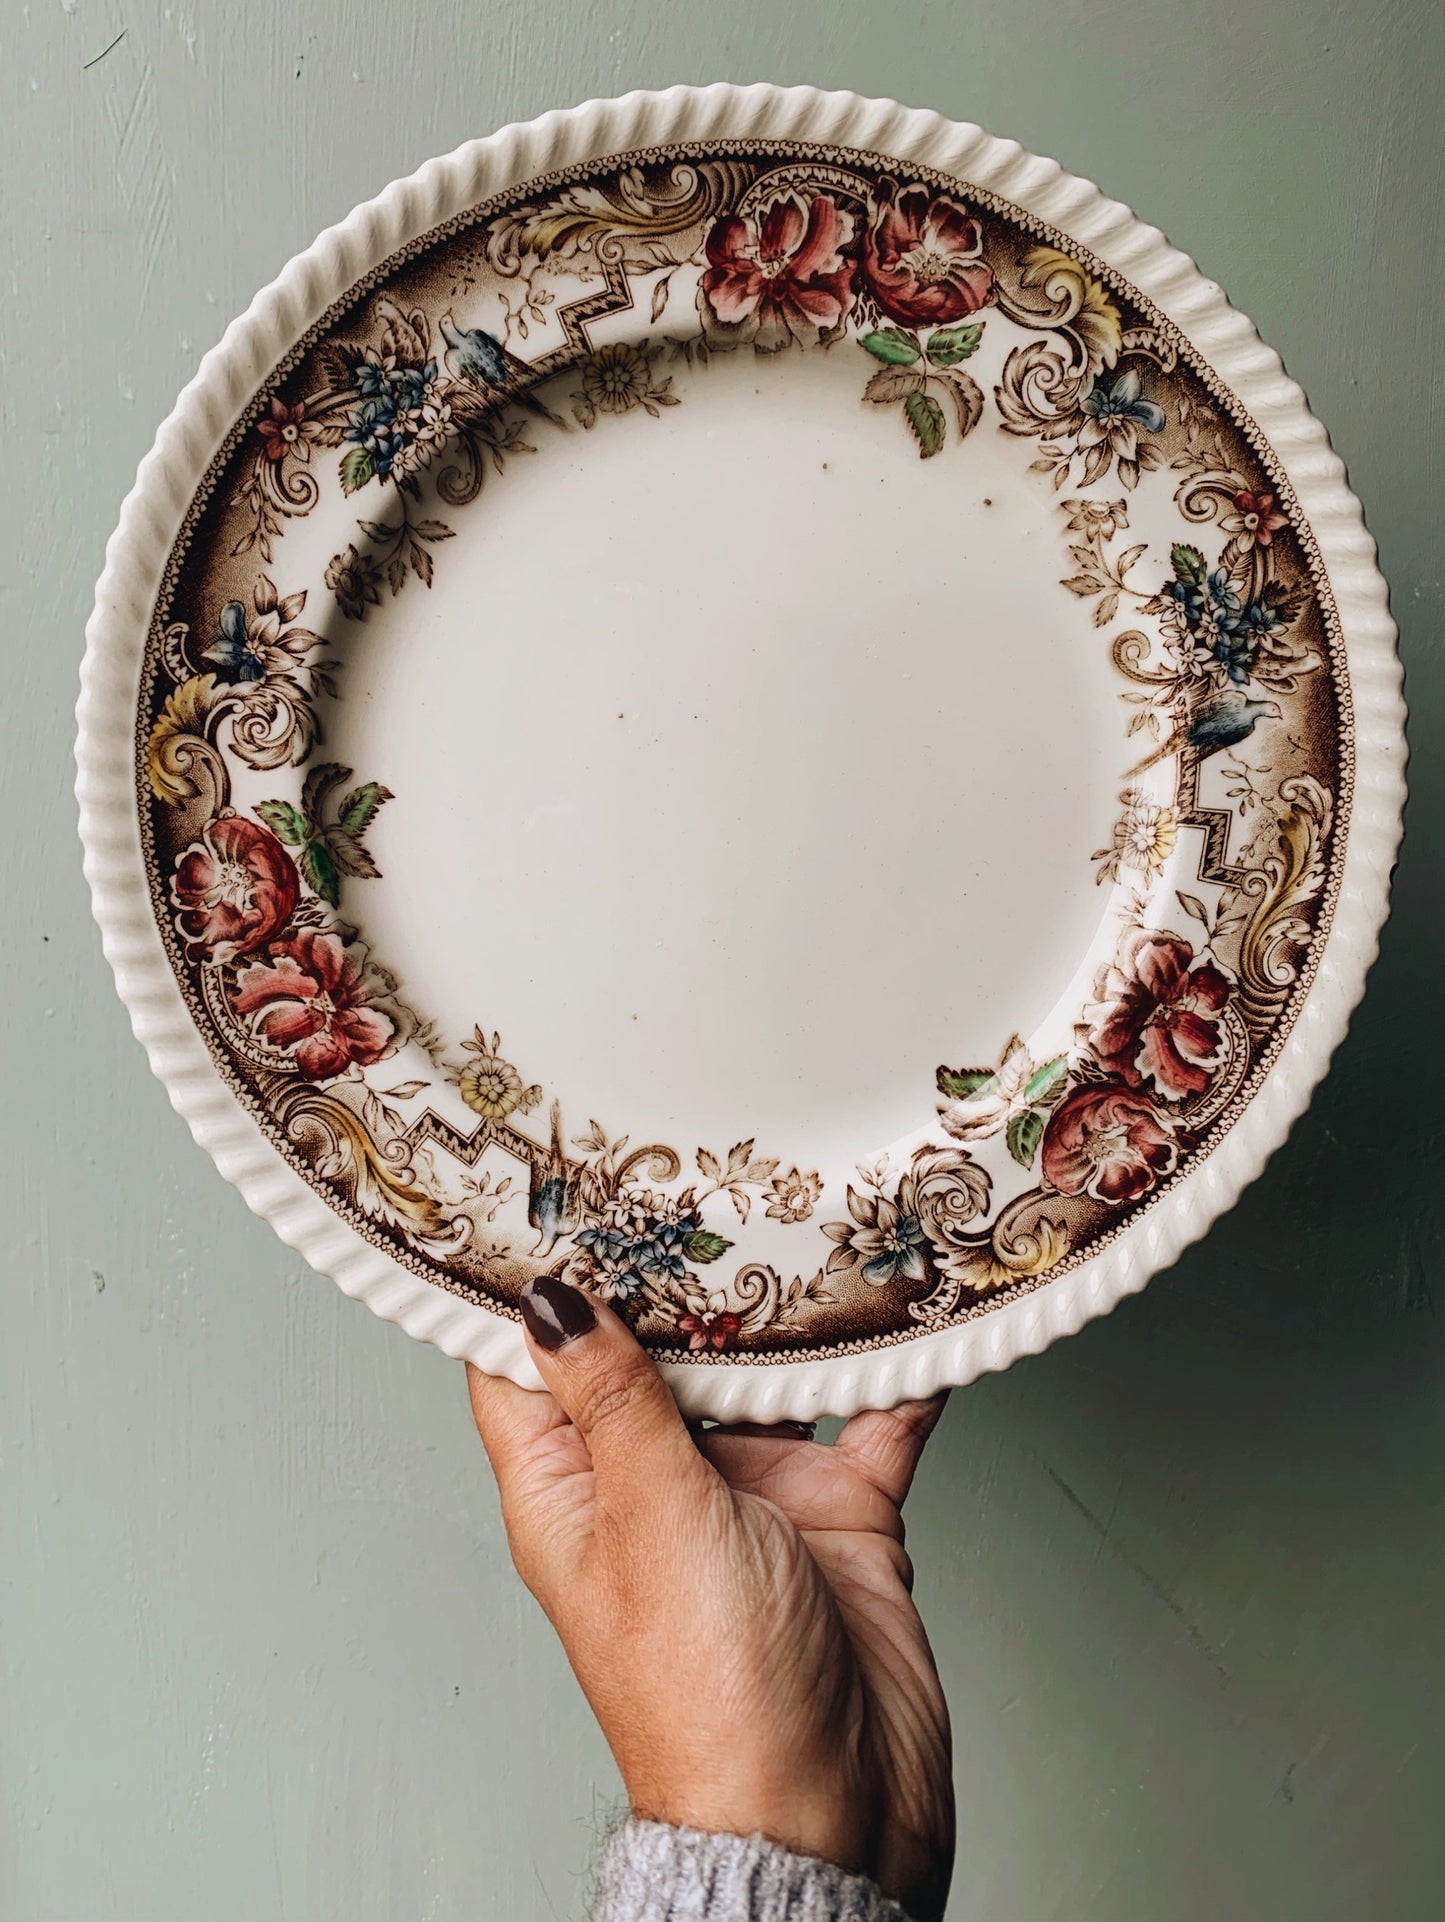 Antique Johnson & Bro’s Decorative Plate (scalloped edging / two available / sold separately)